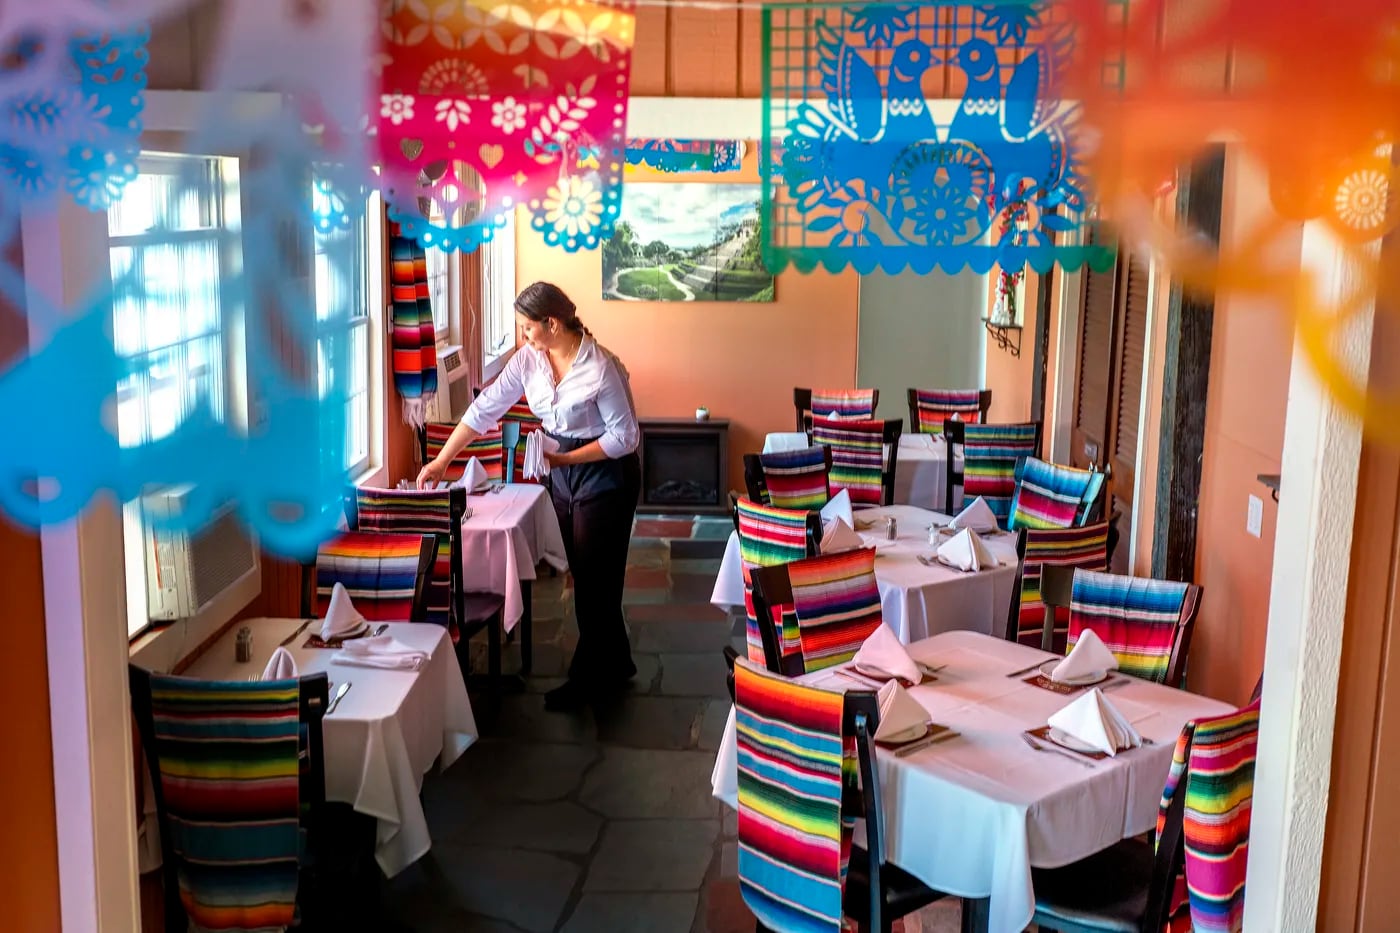 Jessica Eguizabal readies the dining room, a festive and colorful space, at Los Machetes.